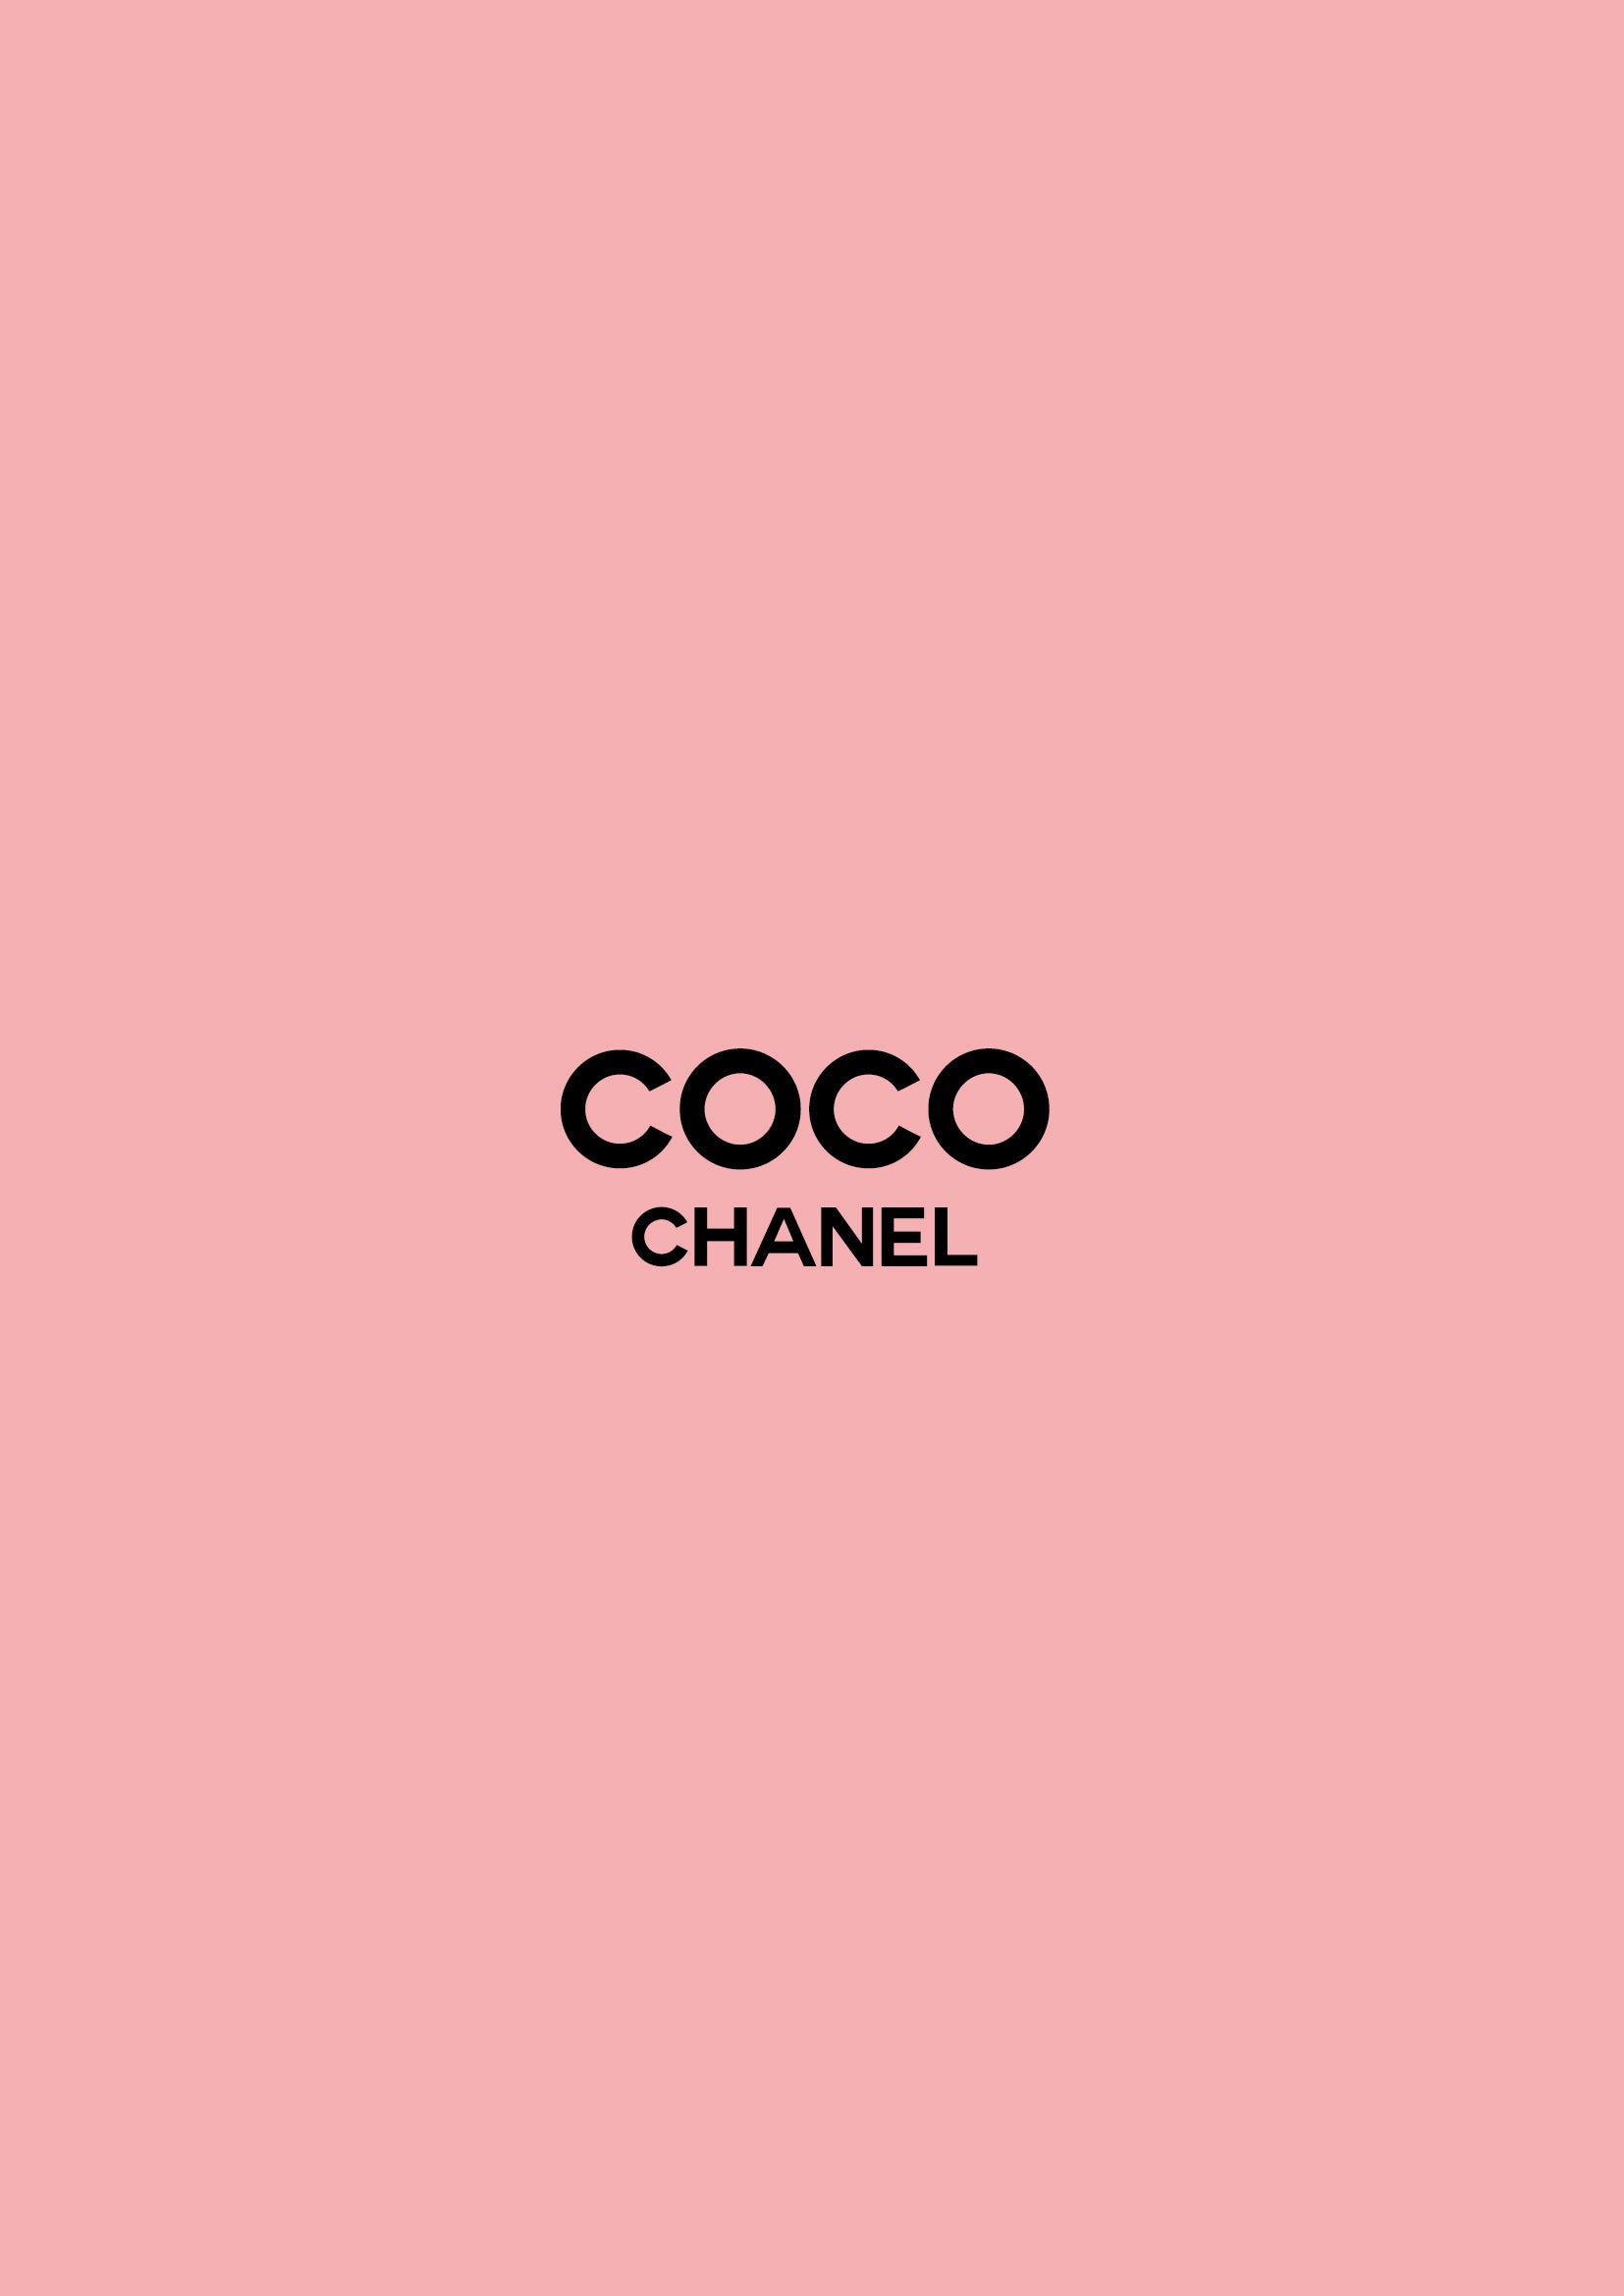 Coco Chanel Wallpapers - 4k, HD Coco Chanel Backgrounds on WallpaperBat